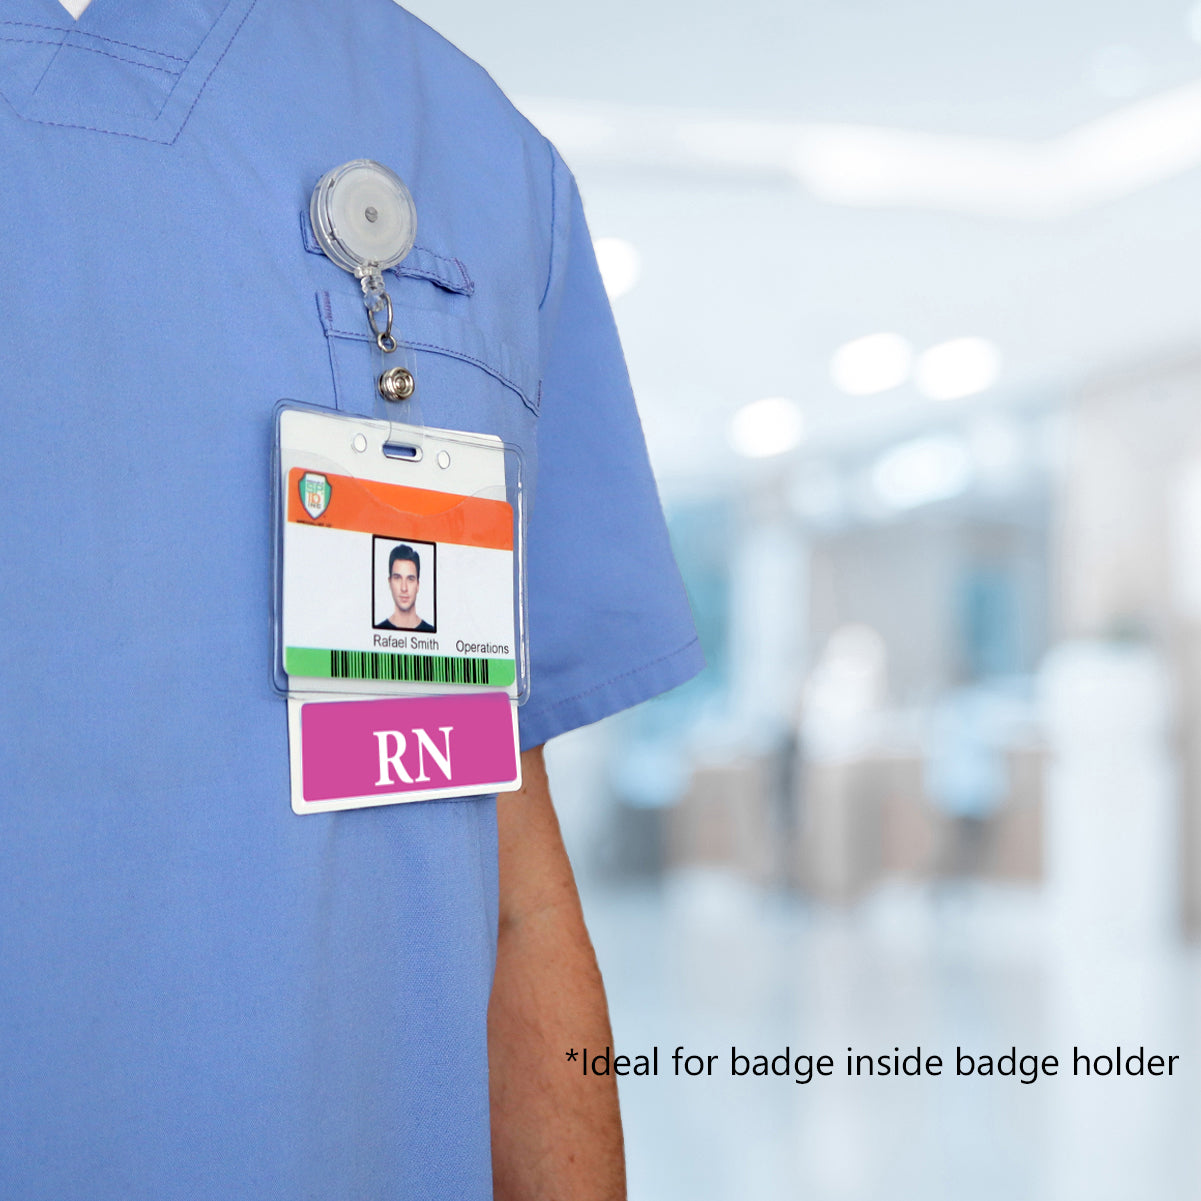 Close-up of a person wearing blue scrubs with an Extra Large RN Badge Buddy - XL Badge Backer for Registered Nurse - Horizontal Hospital ID Badge Buddies attached to the chest pocket. The horizontal hospital ID includes a photo, name, role, and an additional RN label. Background is blurred indoors.